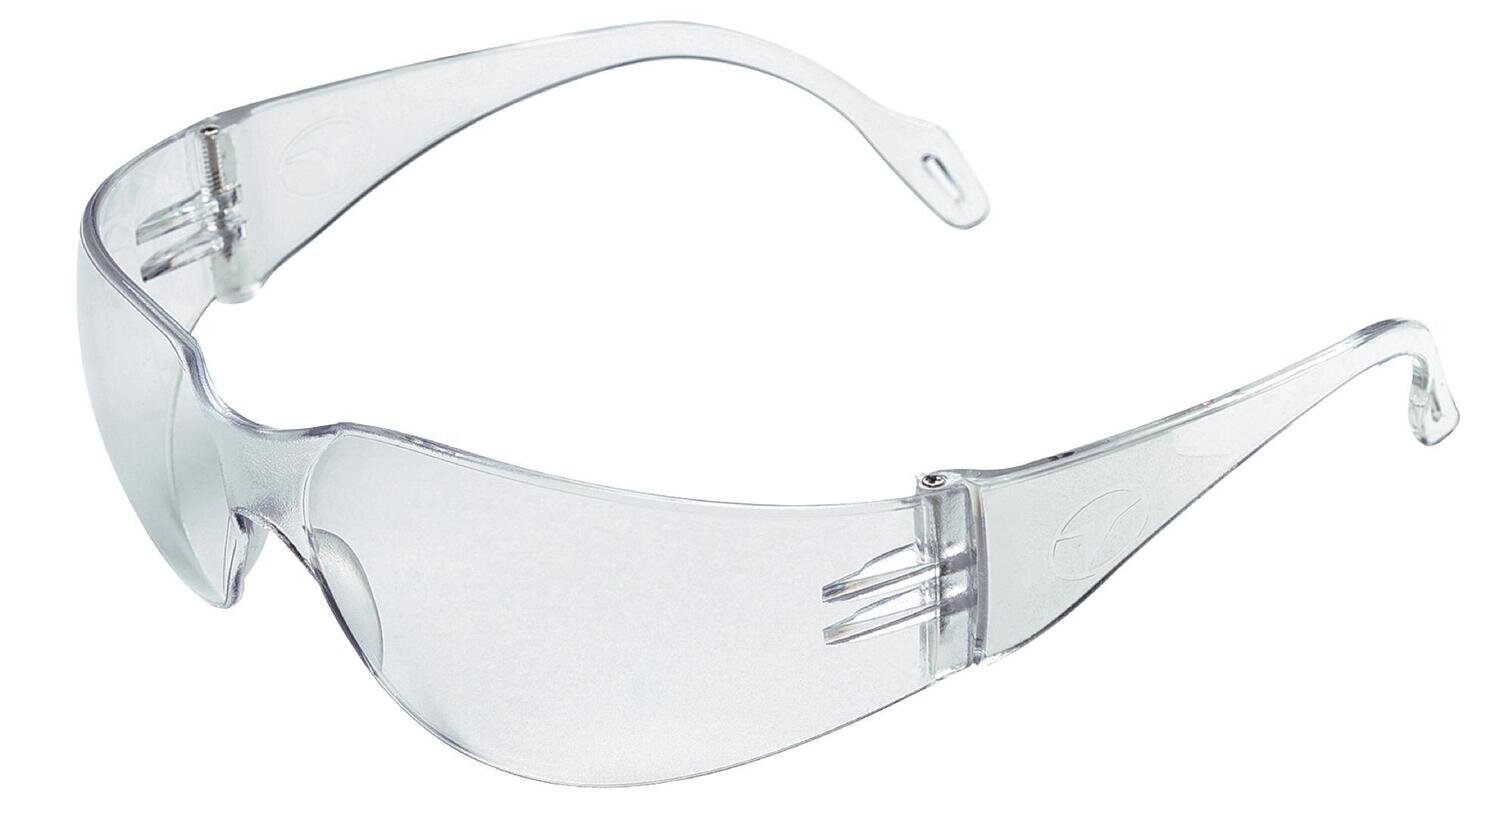 SGL5778004 - Veratti® 2000™ Safety Glasses - Clear Frame/Clear Lens